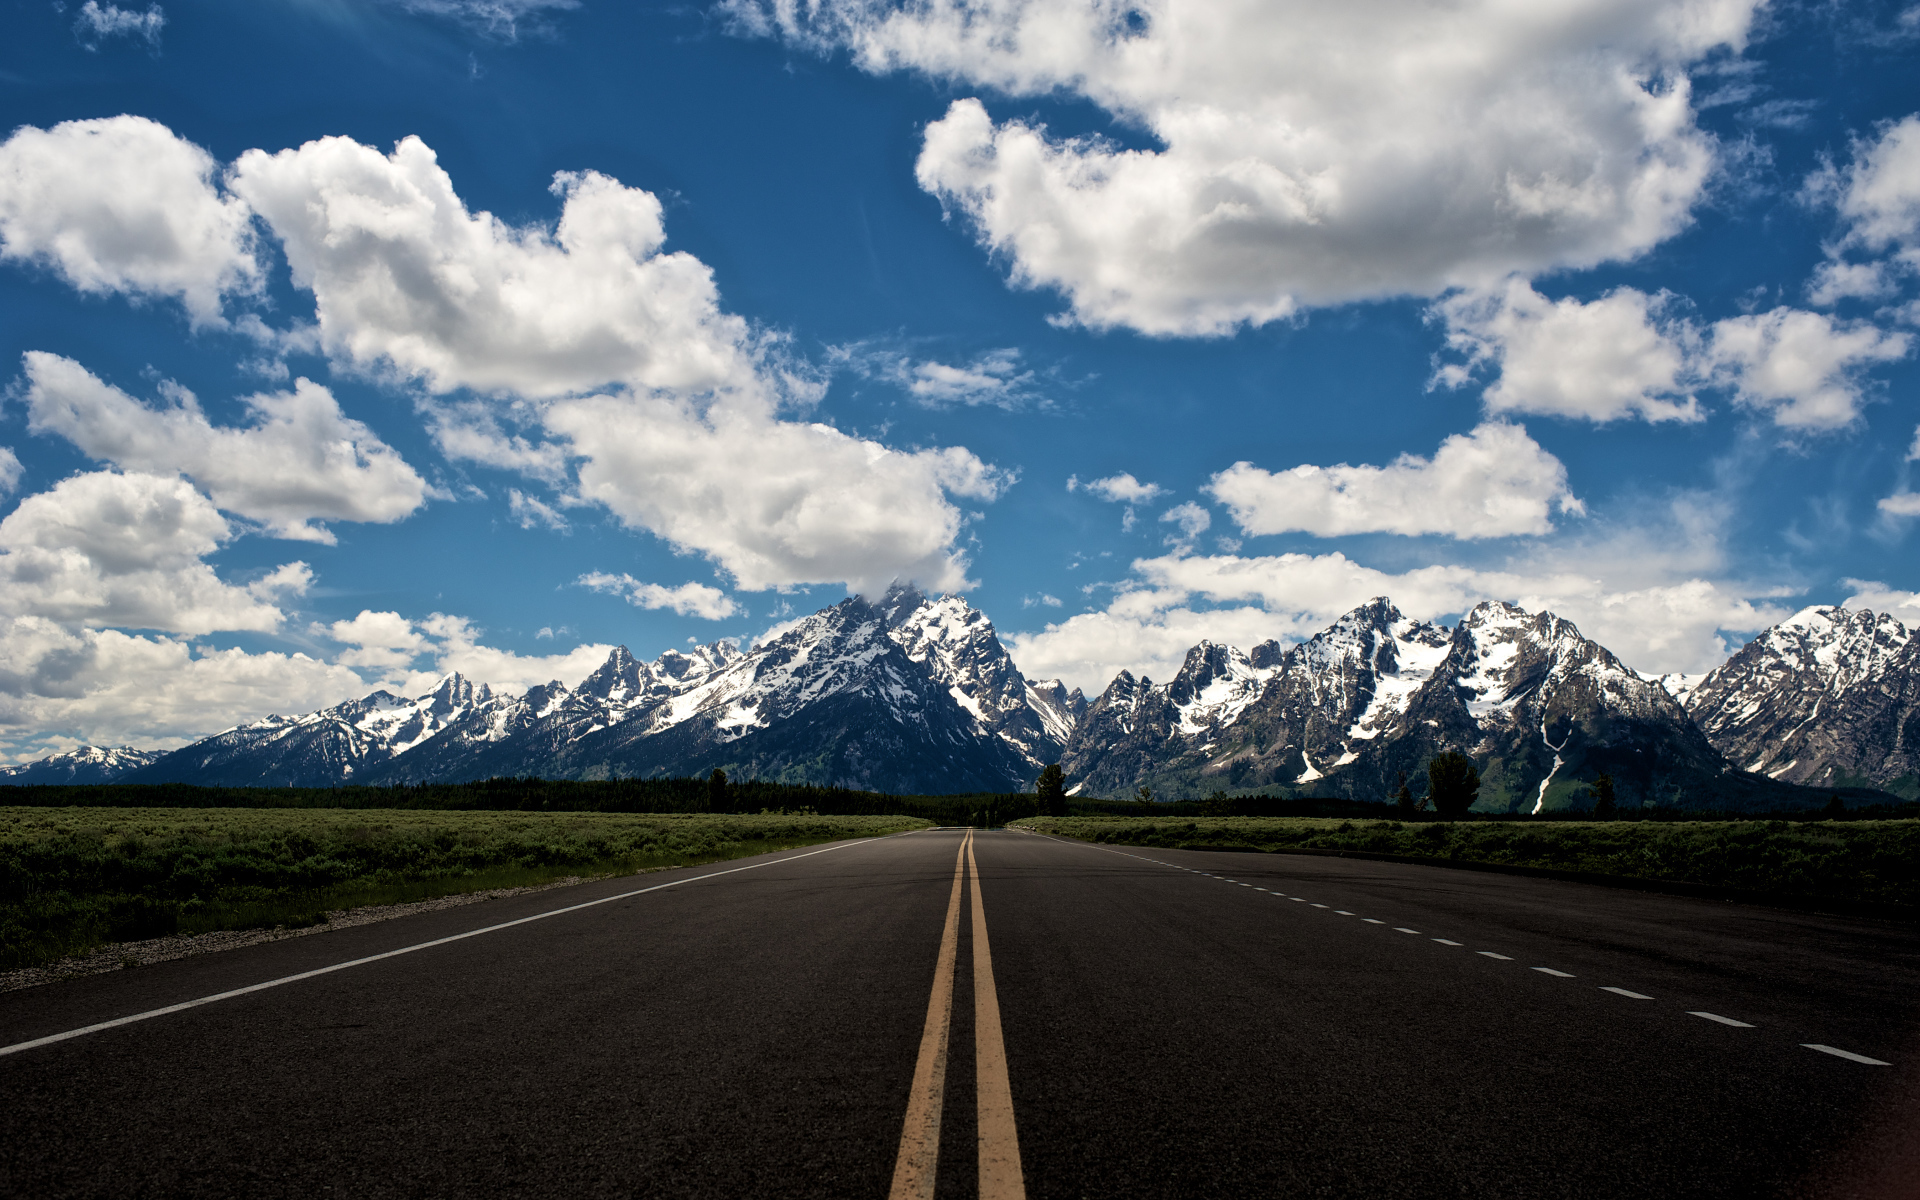 Road to the mountains, USA